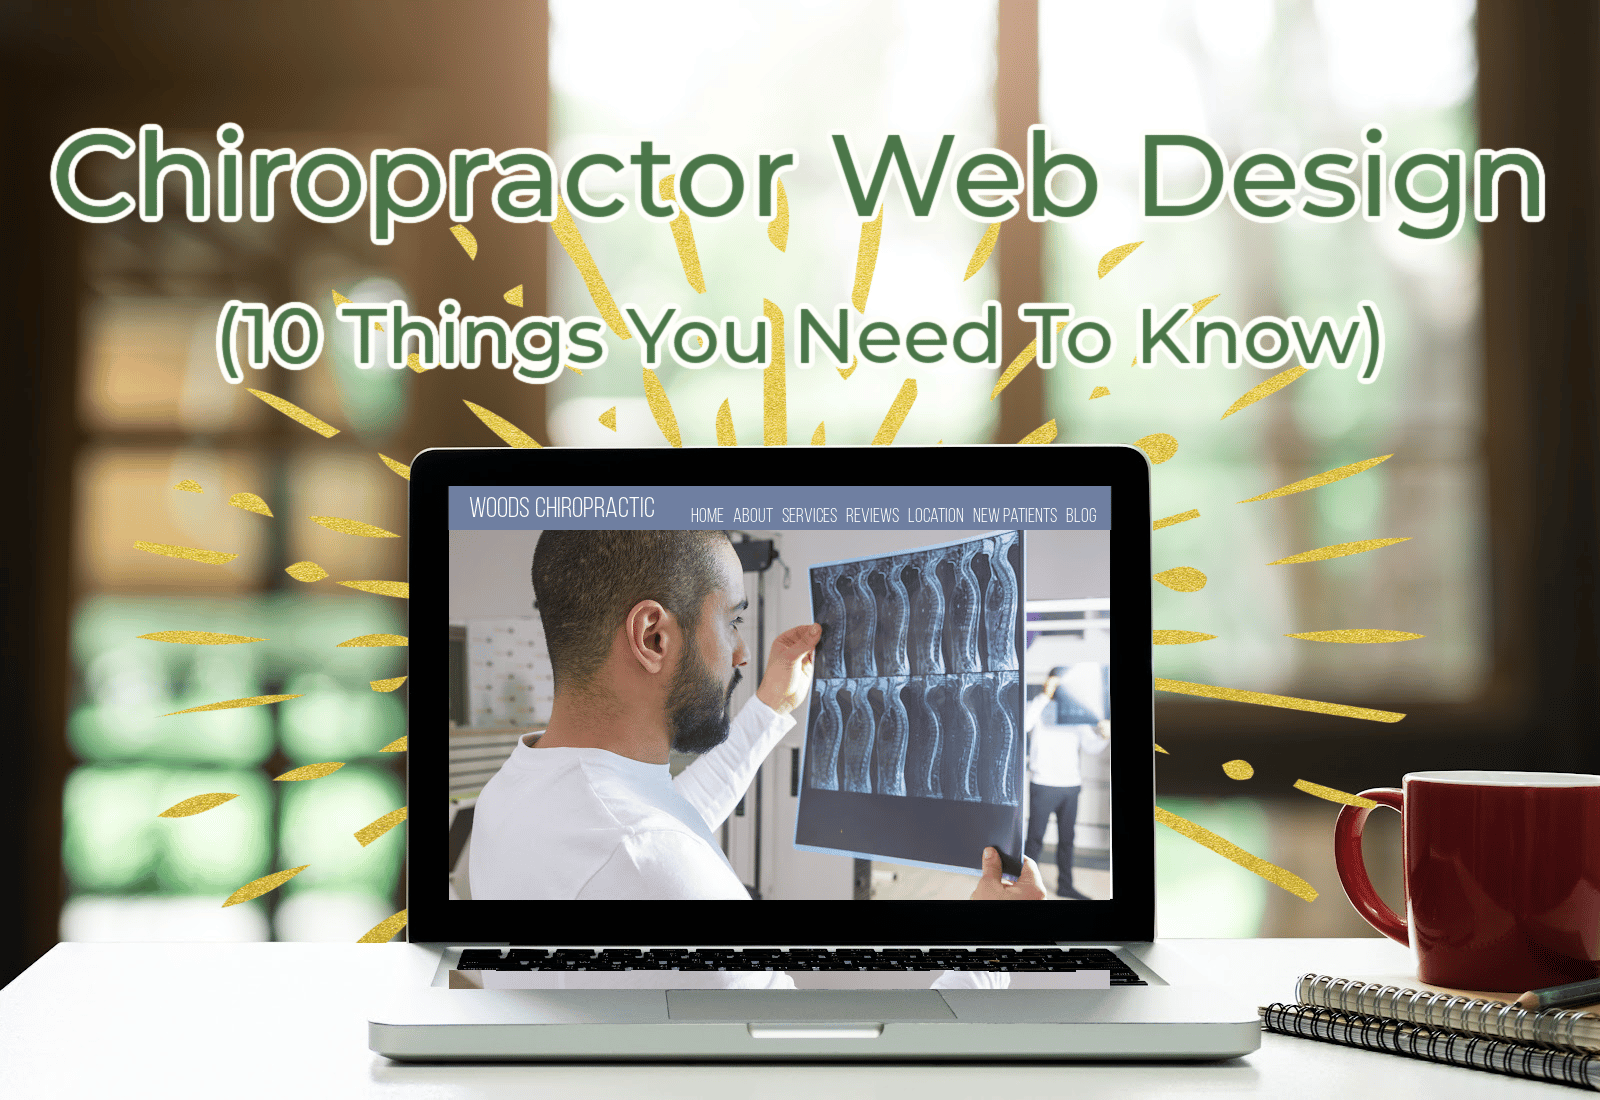 Chiropractor Web Design: 10 Things You Need To Know